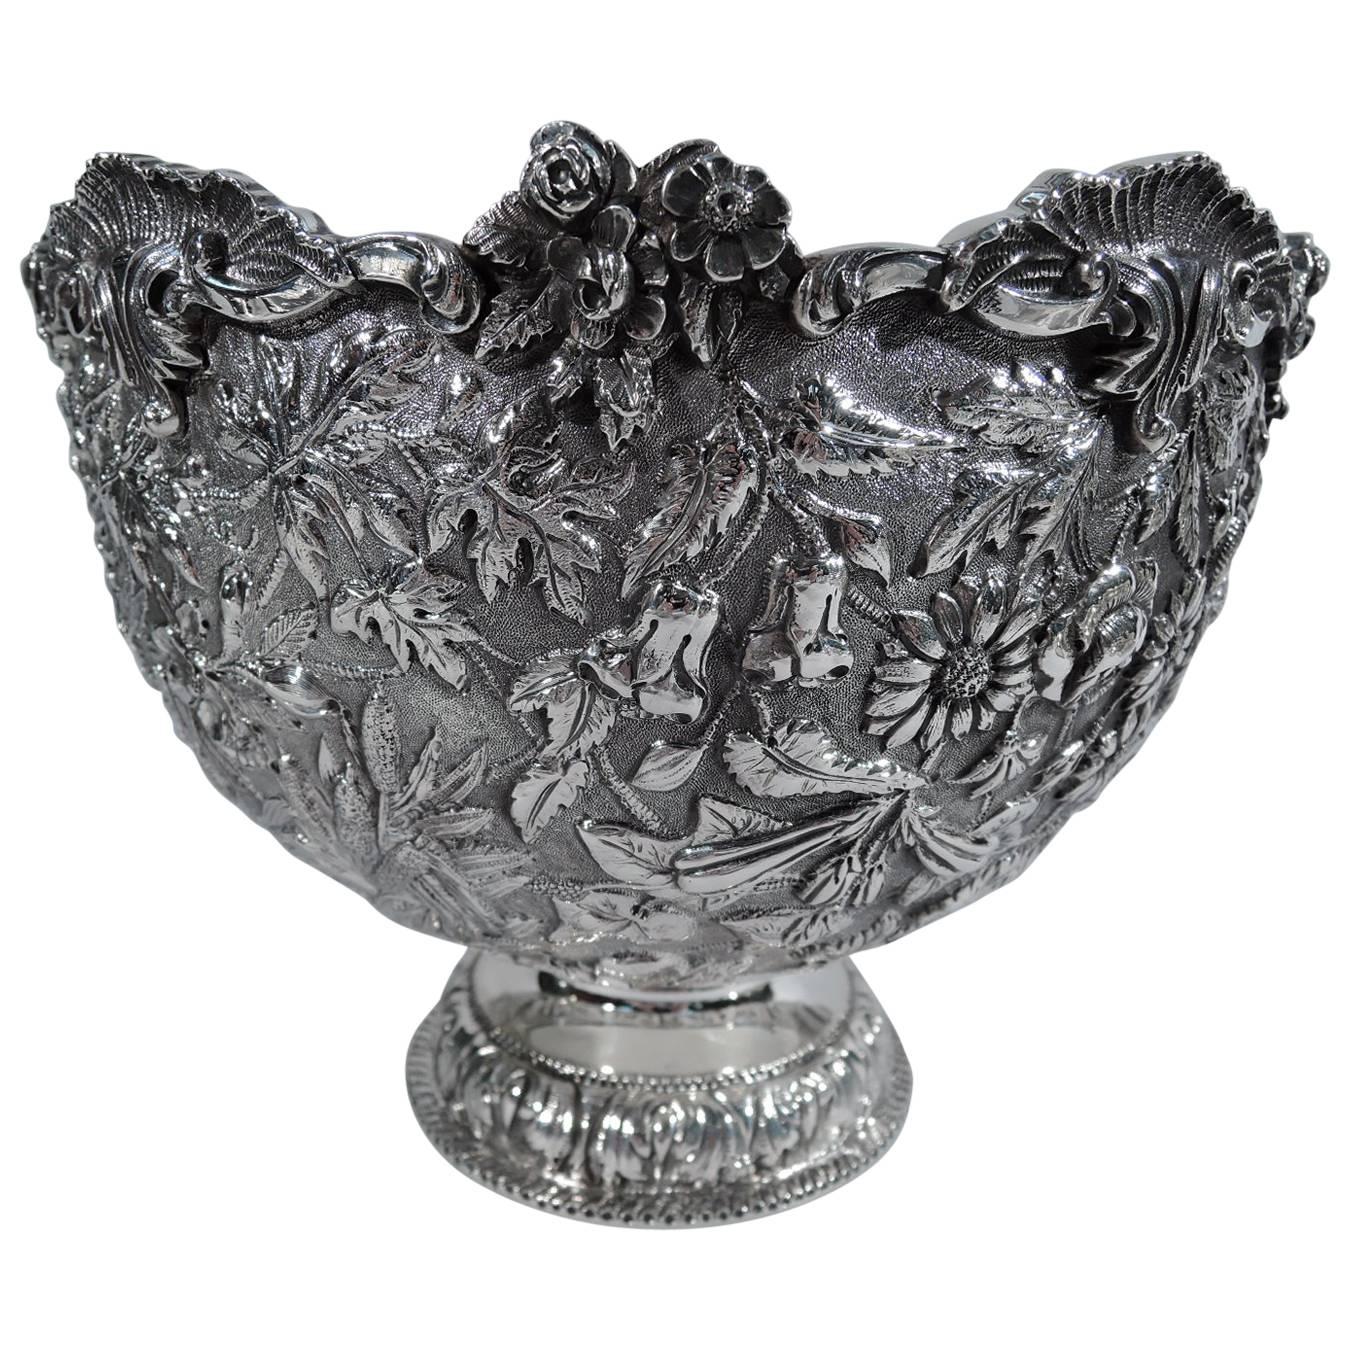 Kirk Sterling Silver Footed Bowl with Beautiful Baltimore Repousse